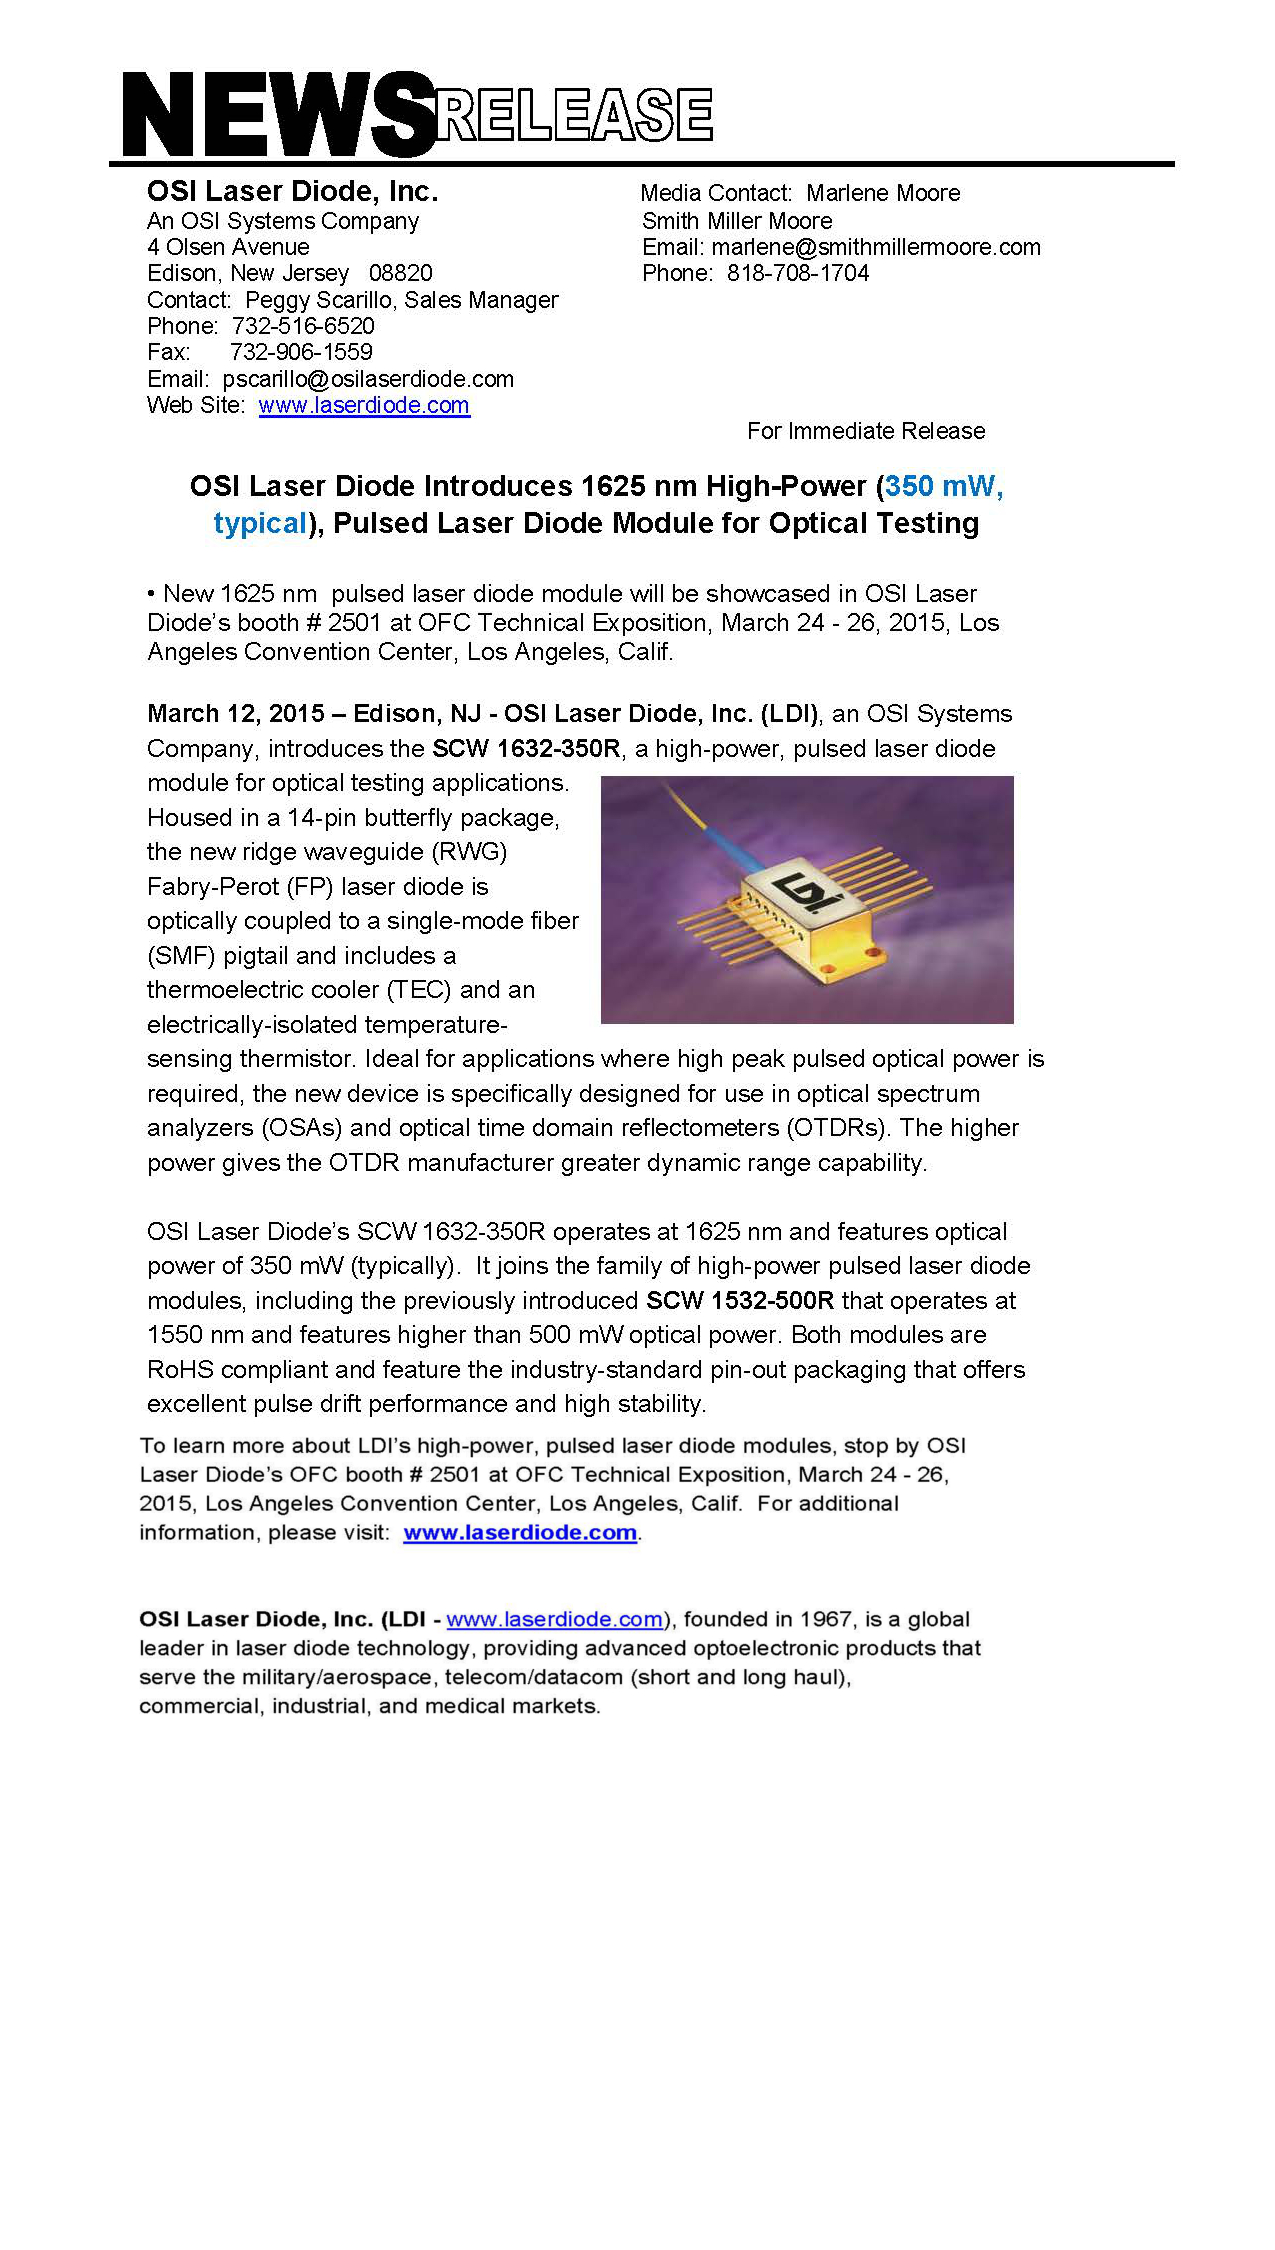 OSI Laser Diode Introduces 1625 nm High-Power (350 mW, typical), Pulsed Laser Diode Module